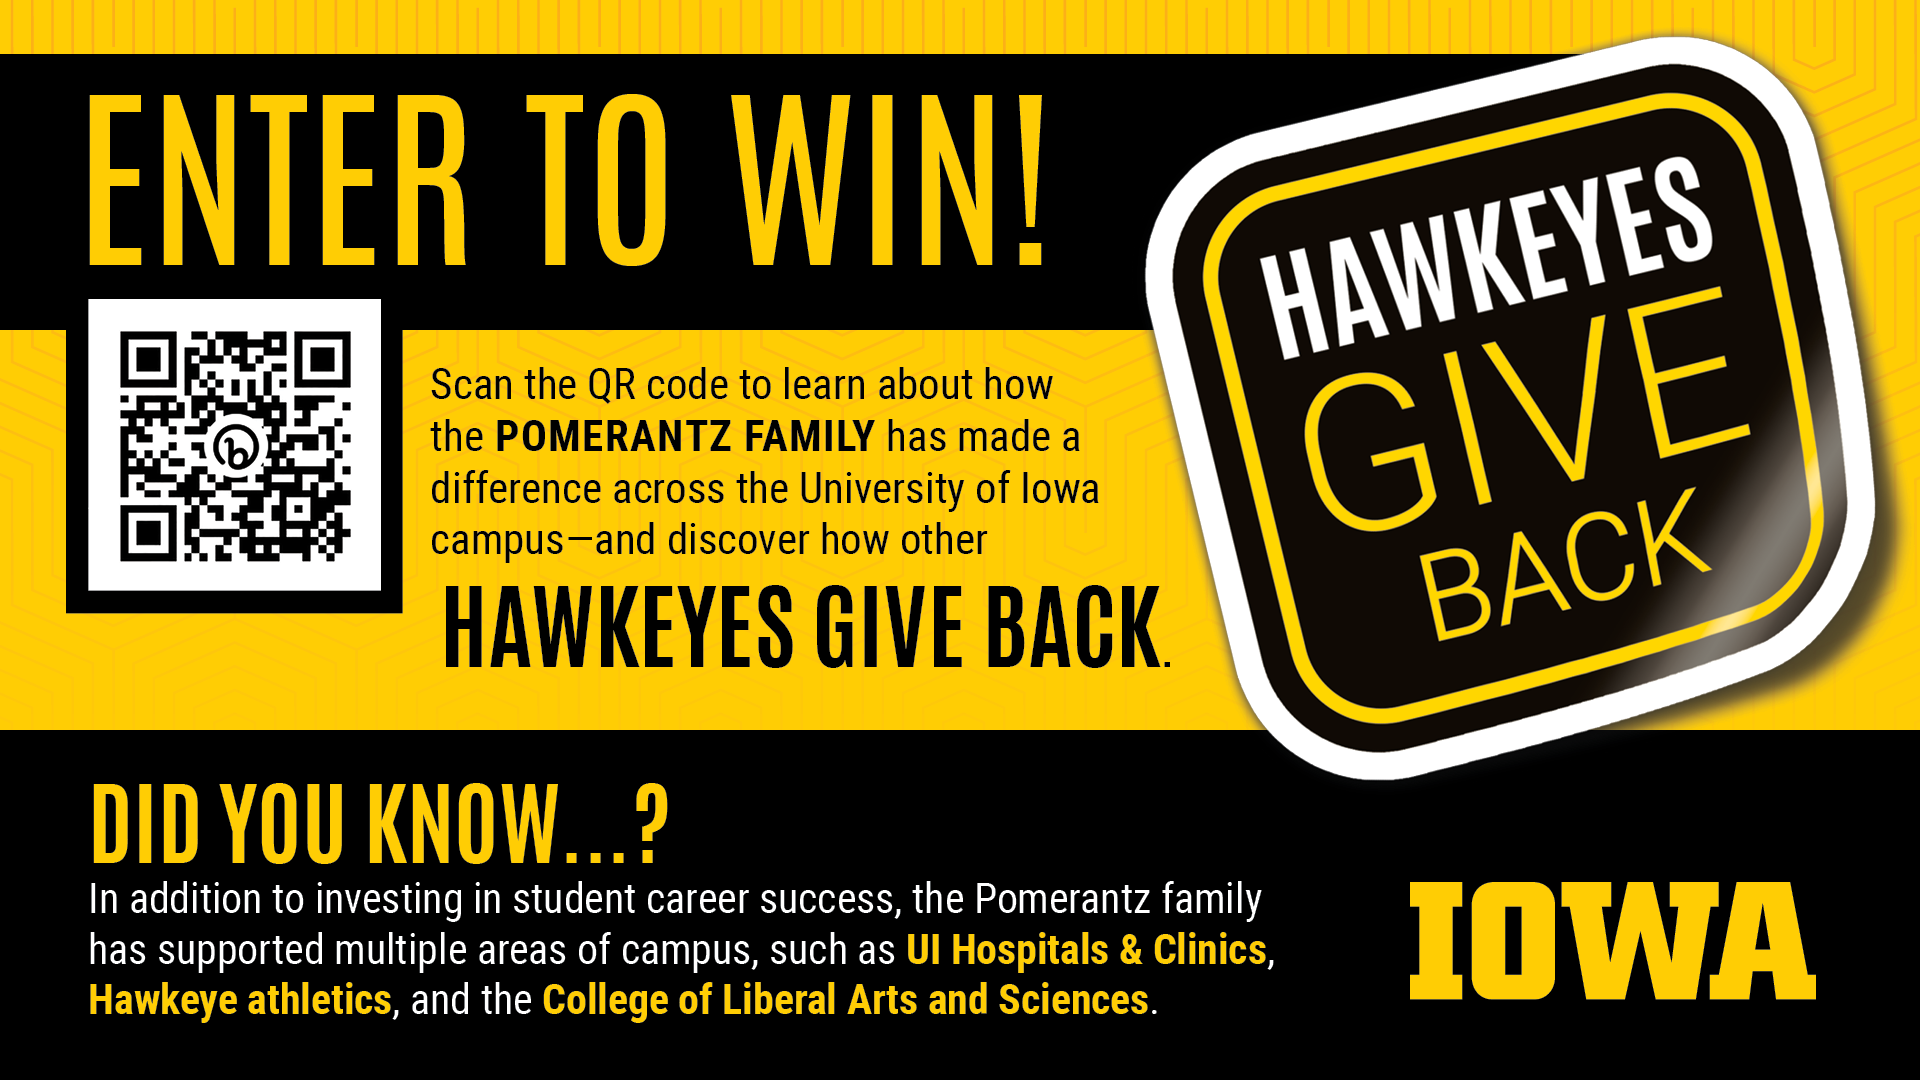 Hawkeyes Give Back - Enter to Win